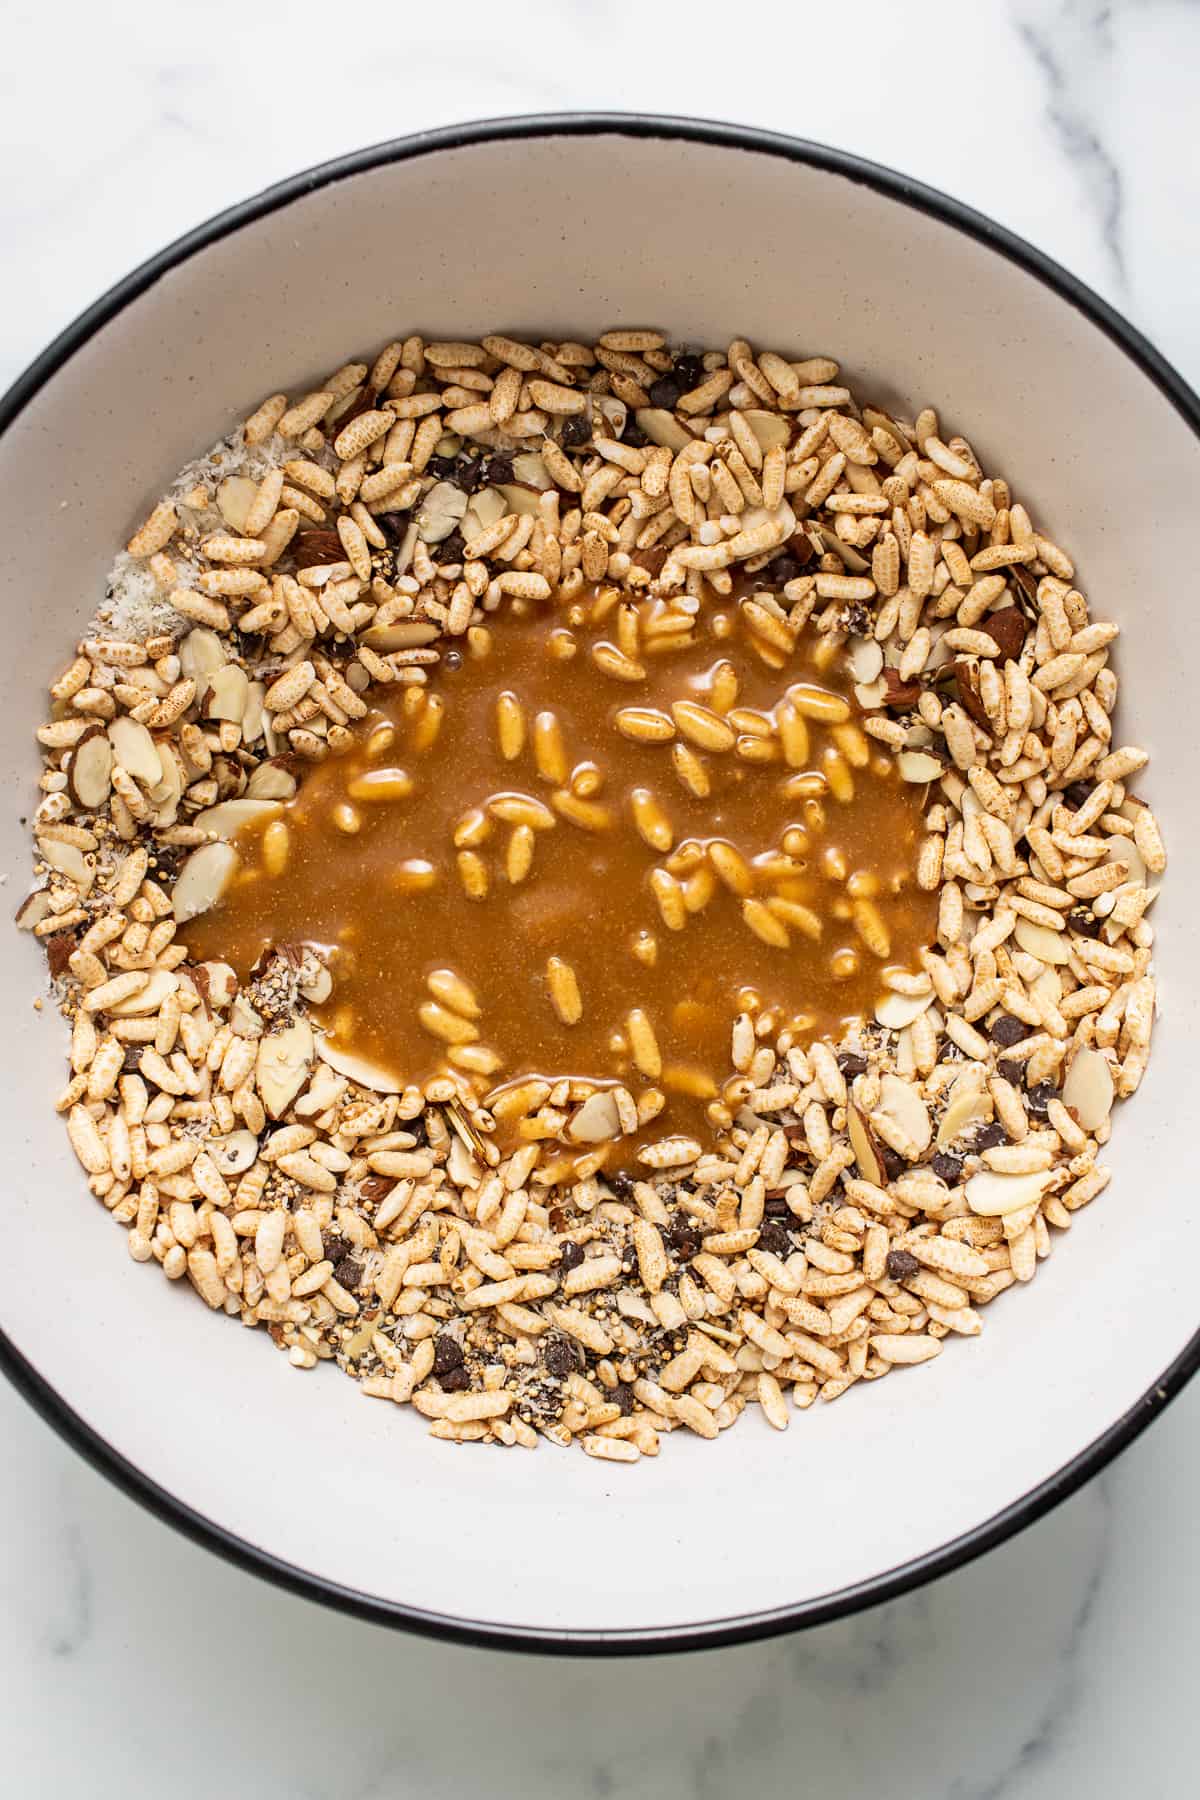 Melted brown rice syrup with brown rice.